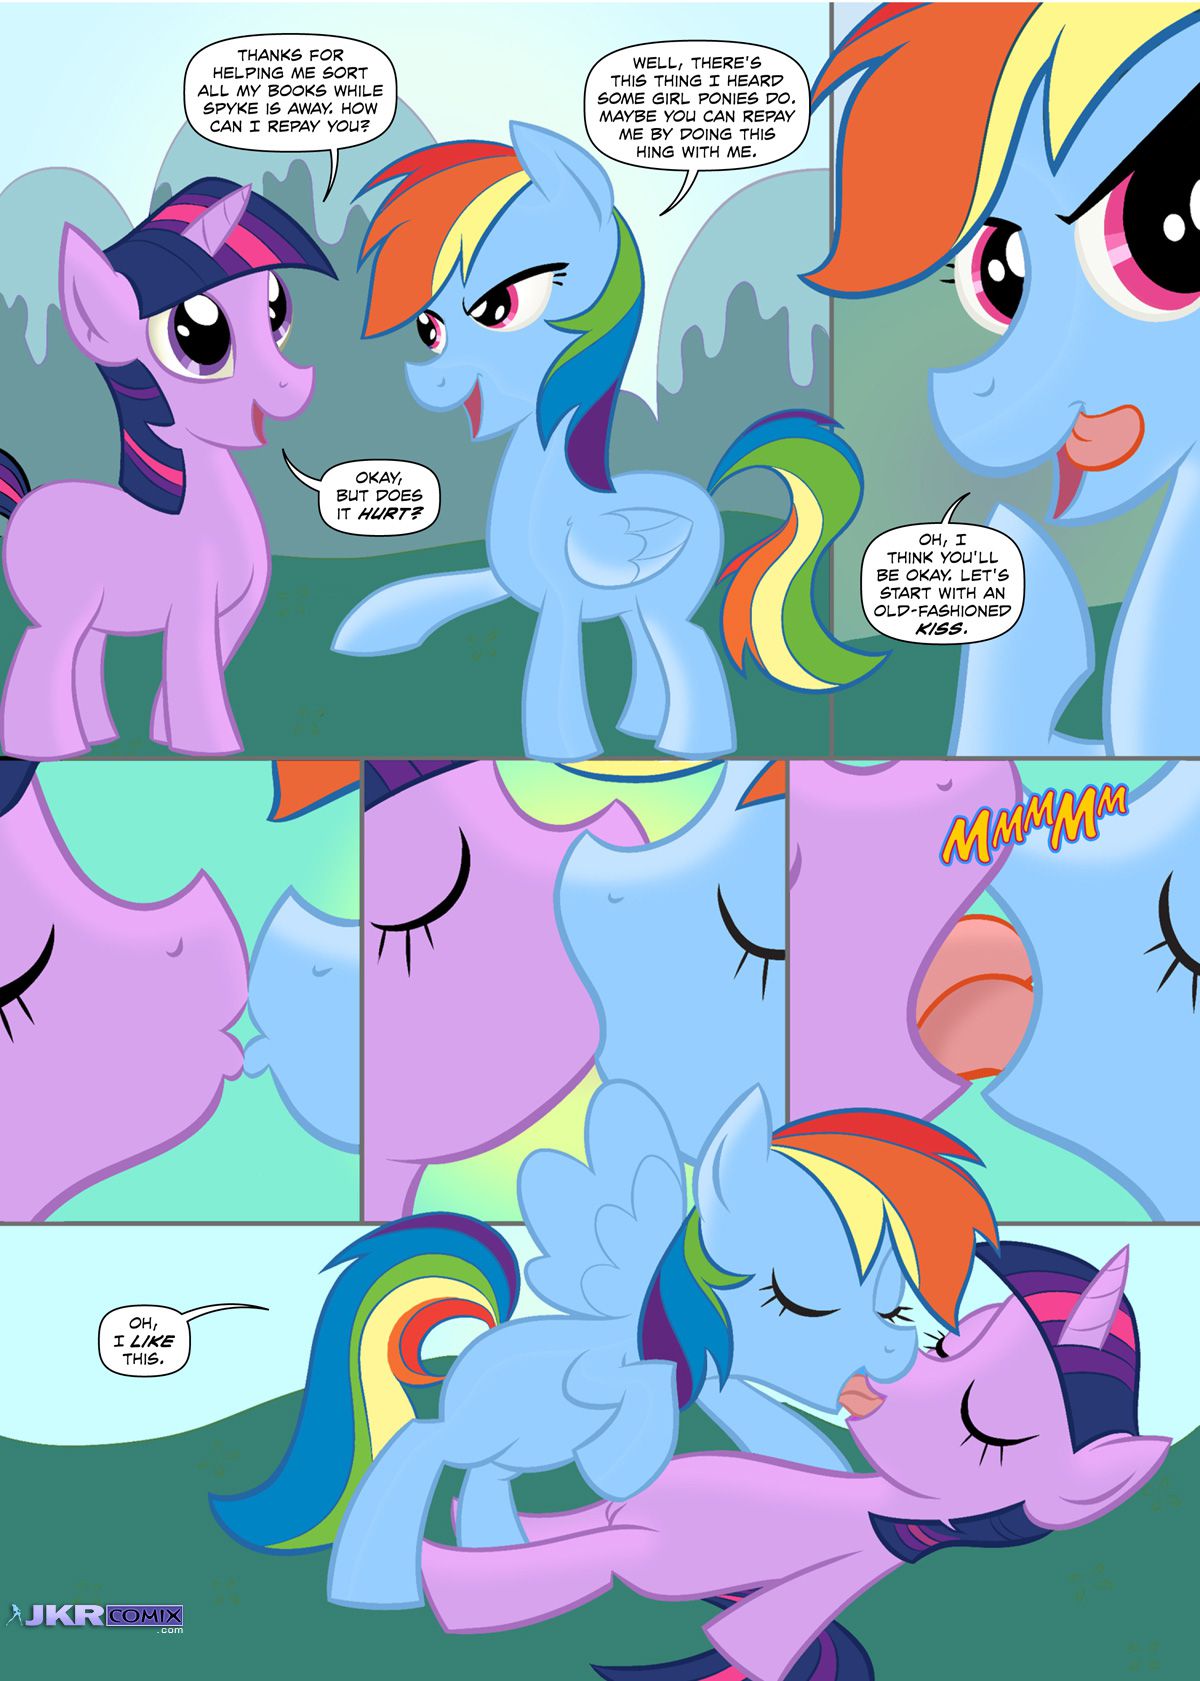 Pony Cums In Girl